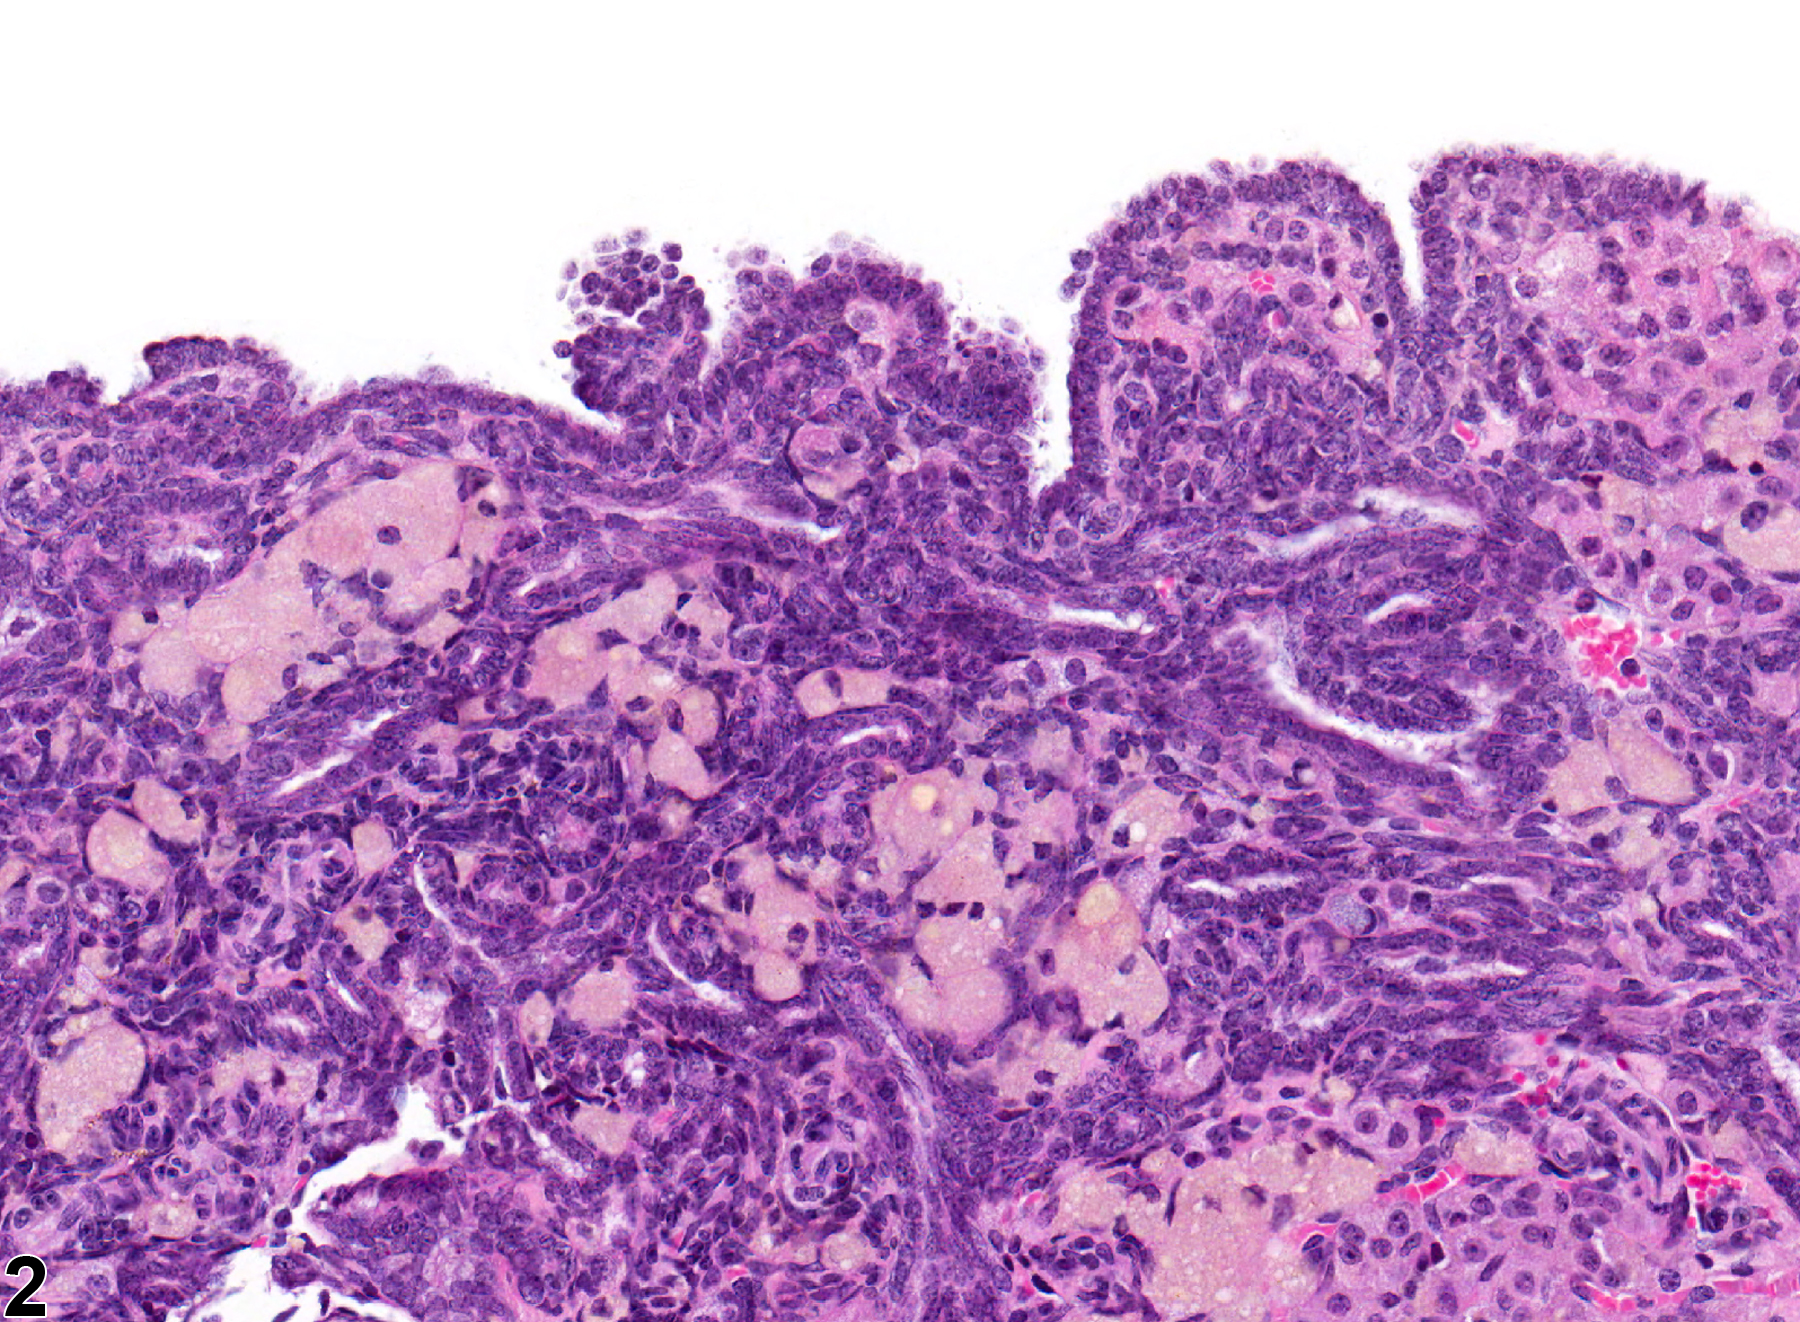 Image of epithelial hyperplasia in the ovary from a female F344/N rat in a chronic study